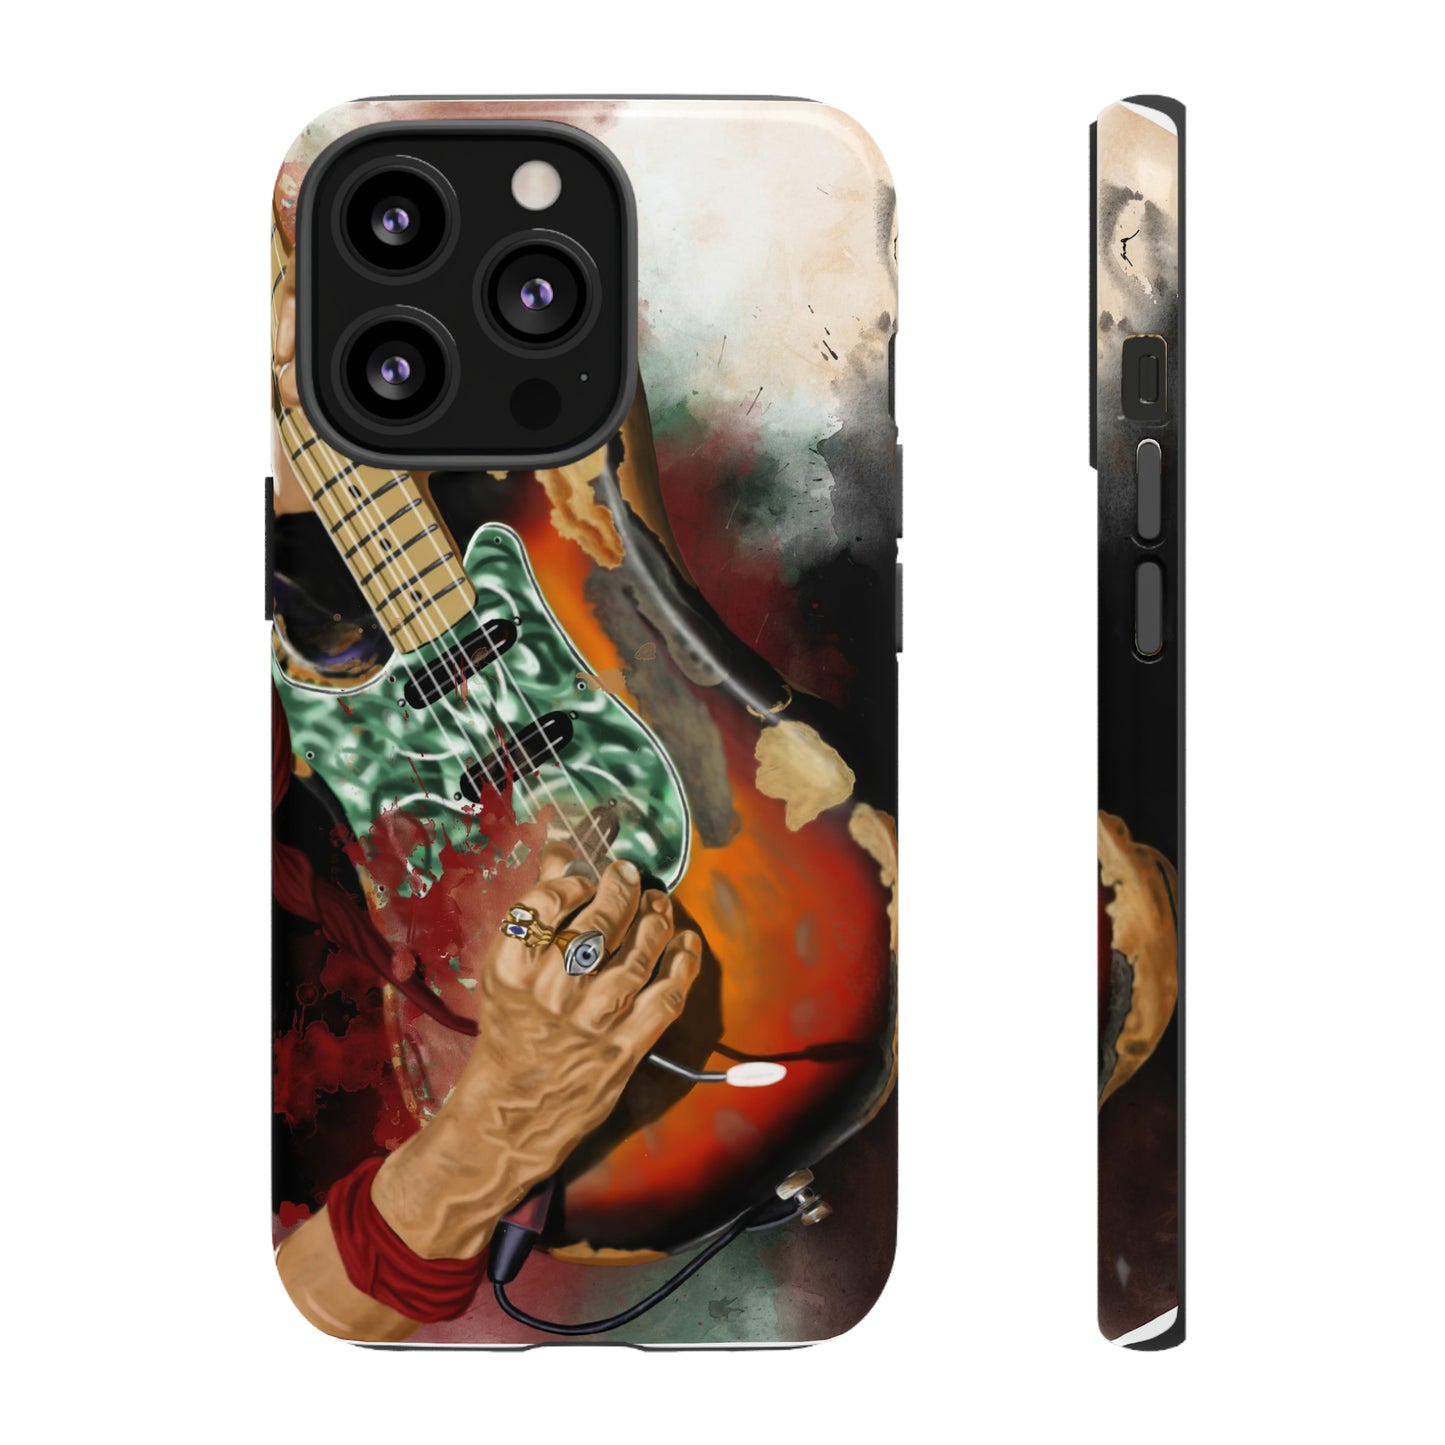 Digital painting of vintage electric guitar with hands printed on iphone phone case